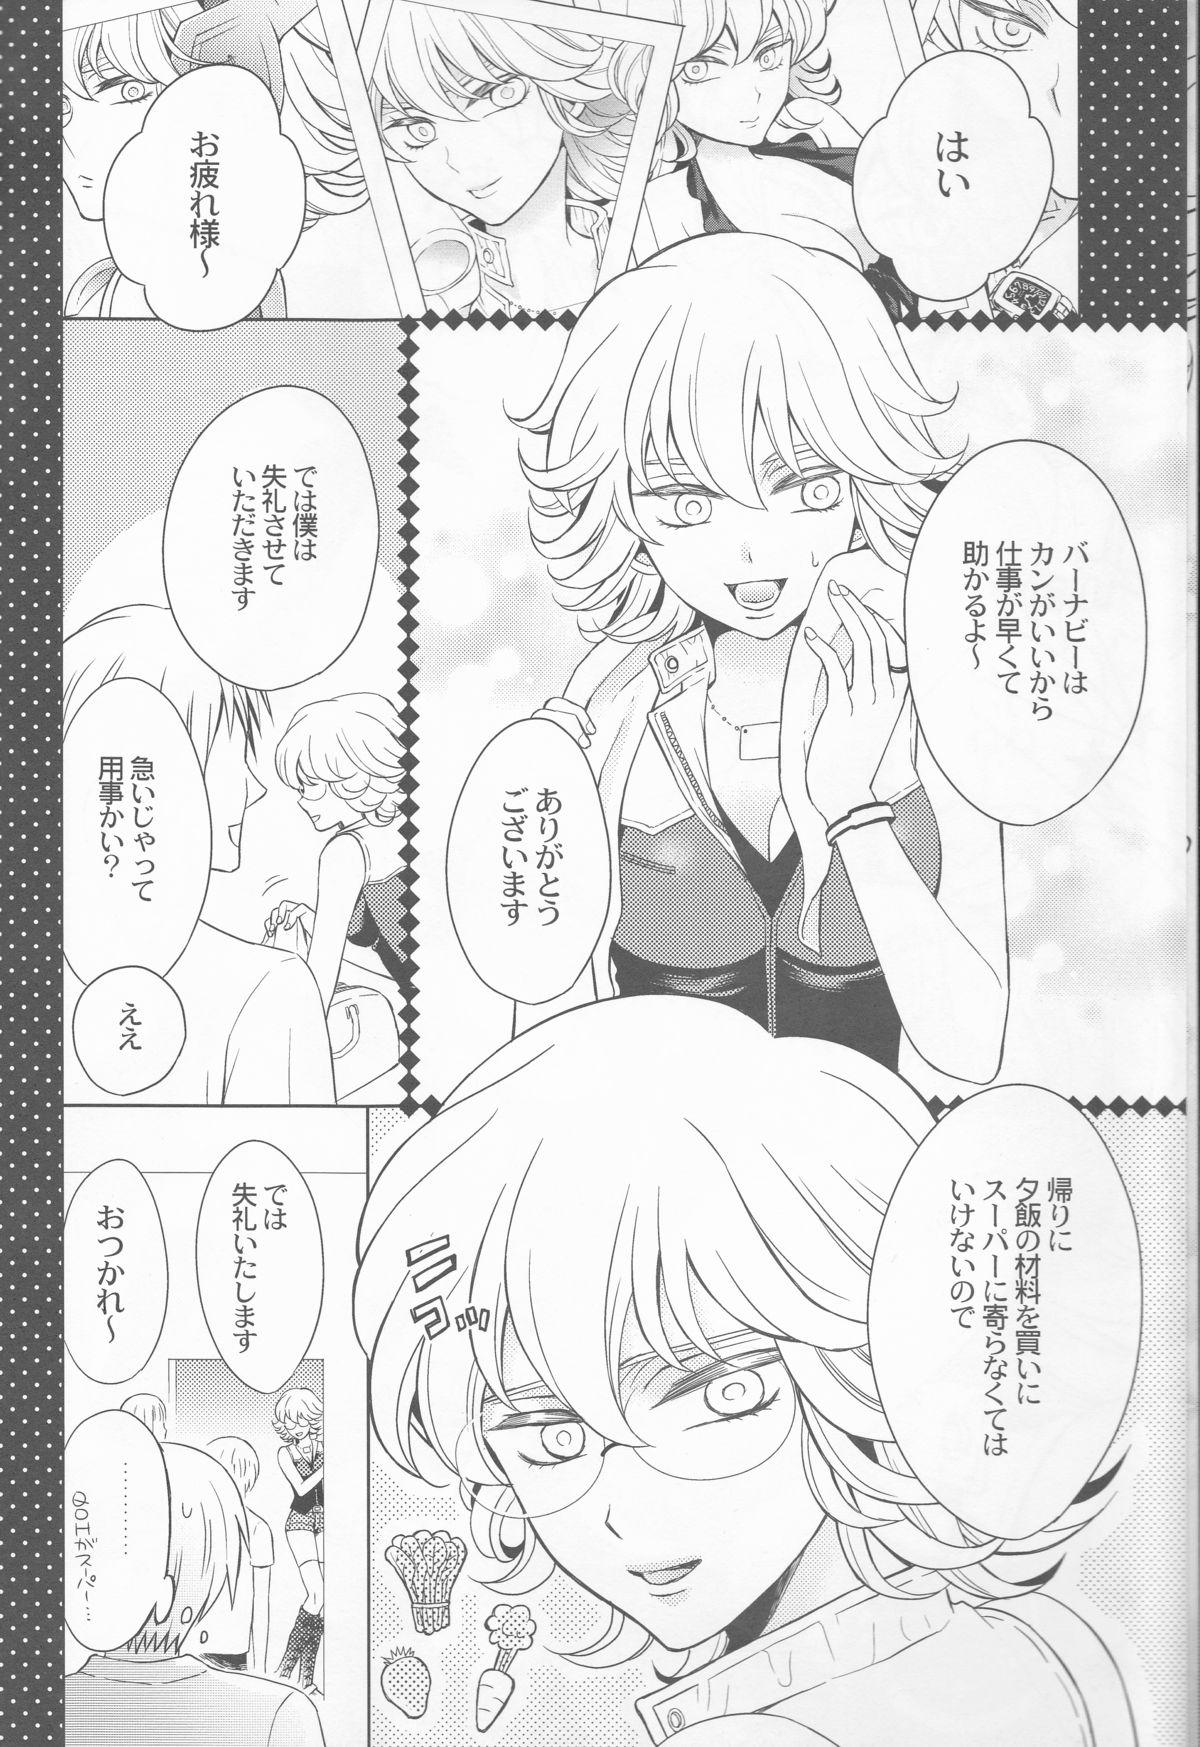 Boobs Candy Bunny - Tiger and bunny Grande - Page 5